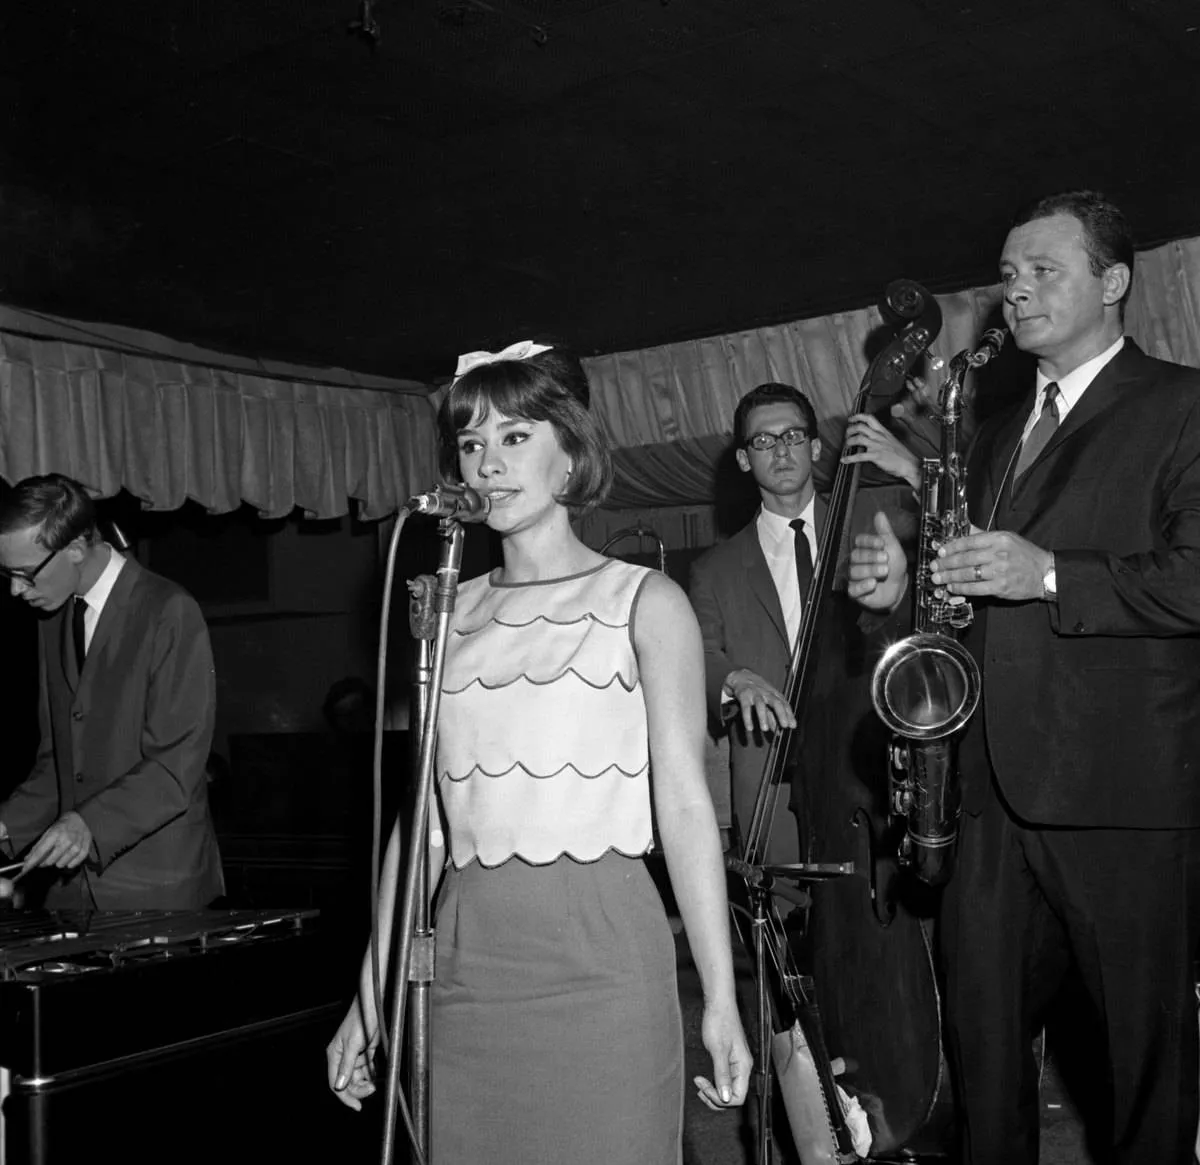 Jazz singer Astrud Gilberto, bassist Gene Cherico and saxophonist Stan Getz perform onstage at Birdland on the day they recorded the live album Getz Au Go Go on August 19, 1964 in New York, New York